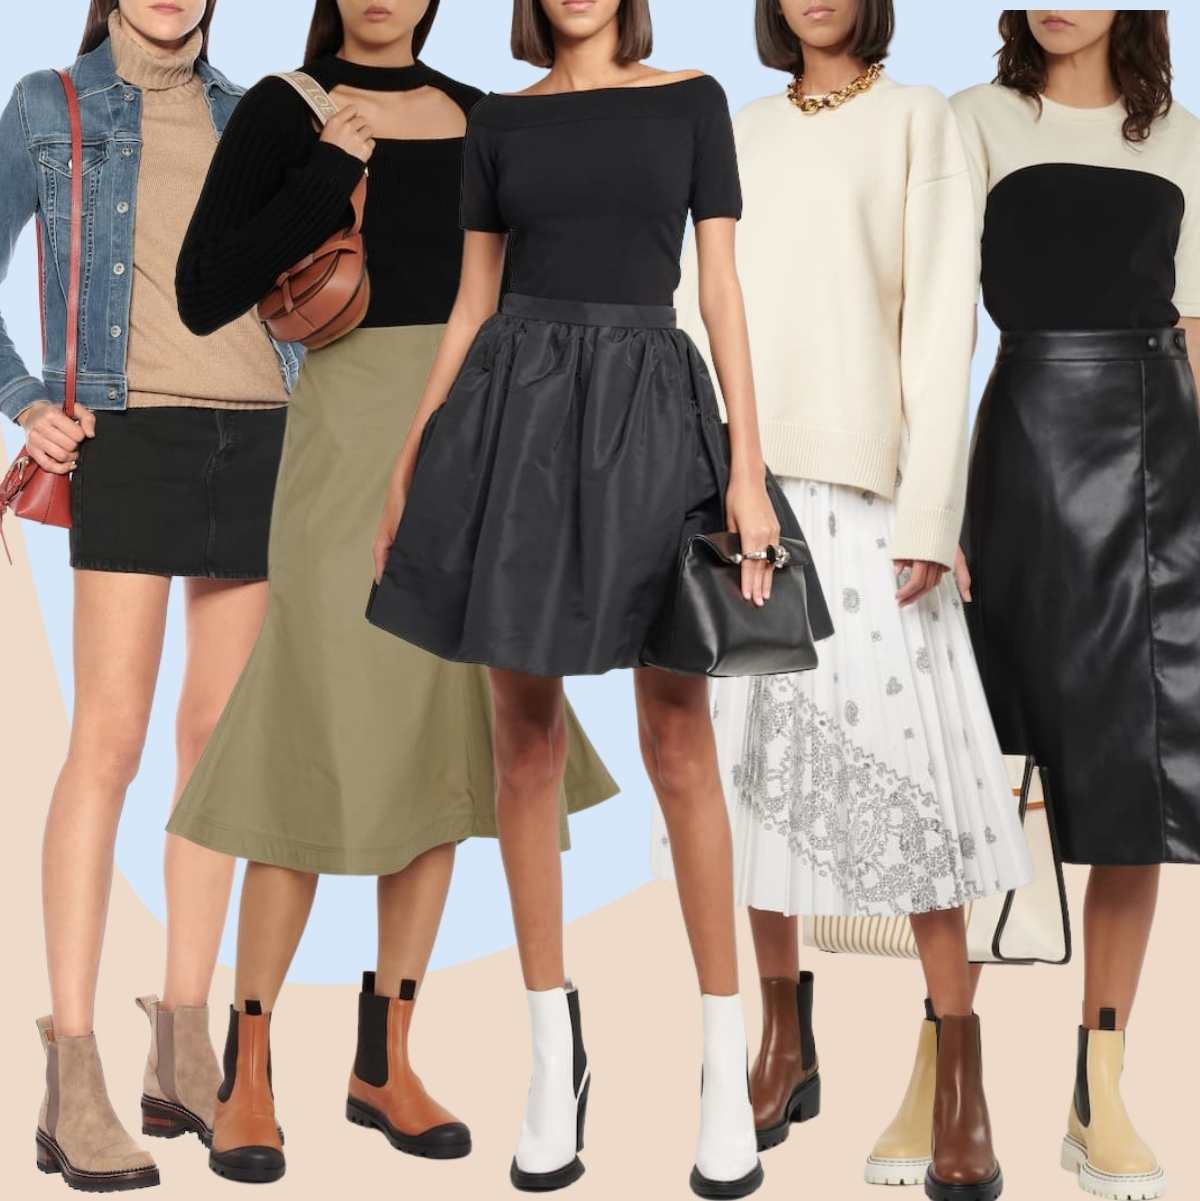 Collage of 5 women wearing chelsea boots outfits with skirts.